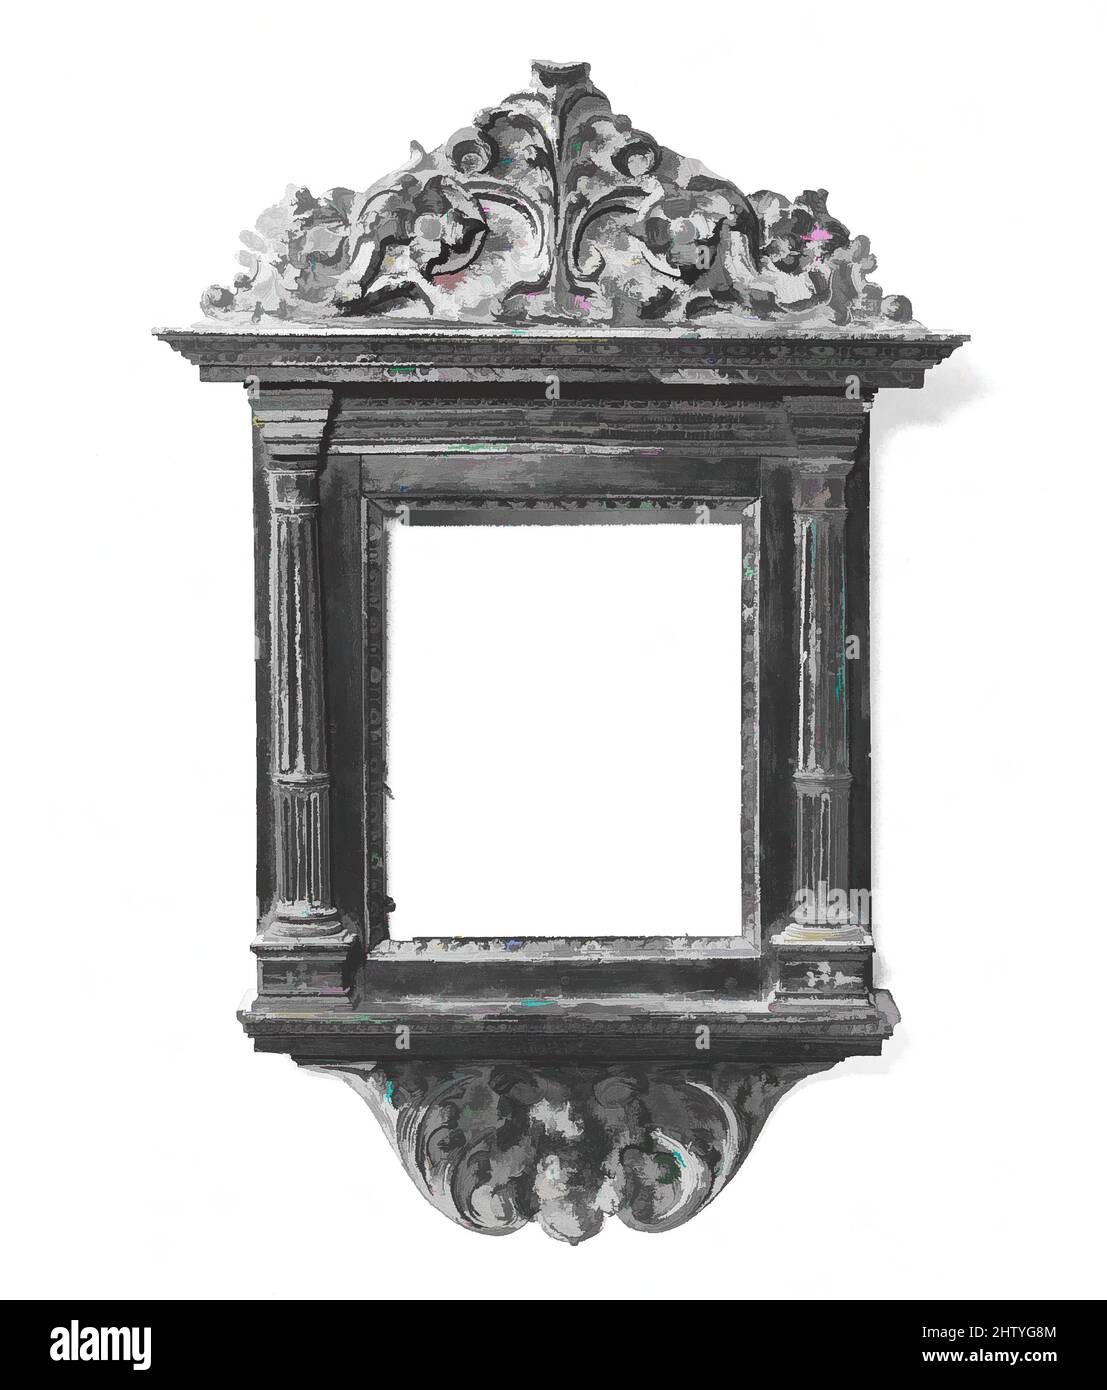 Art inspired by Tabernacle frame, ca. 1860, style 16th century, Italian, Tuscany, Poplar back frame with walnut upper moldings., 65.2 x 42.2, 23.3 x 19.2, 25 x 20.5 cm., Frames, Classic works modernized by Artotop with a splash of modernity. Shapes, color and value, eye-catching visual impact on art. Emotions through freedom of artworks in a contemporary way. A timeless message pursuing a wildly creative new direction. Artists turning to the digital medium and creating the Artotop NFT Stock Photo